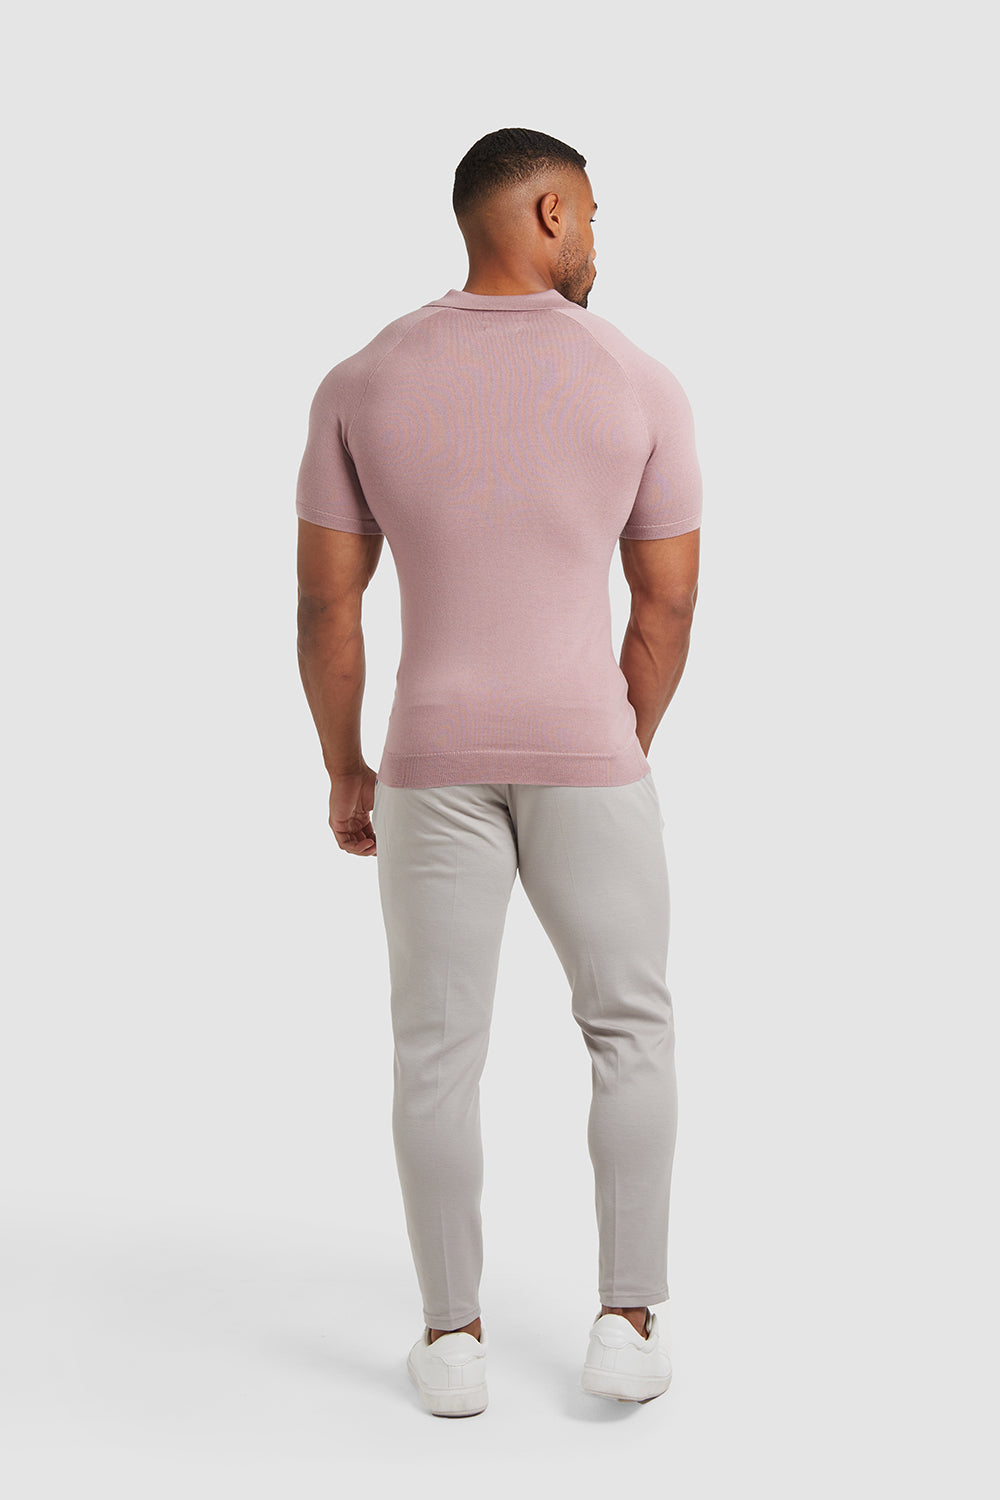 Tailored Athlete Ribbed Open Collar Knitted Polo